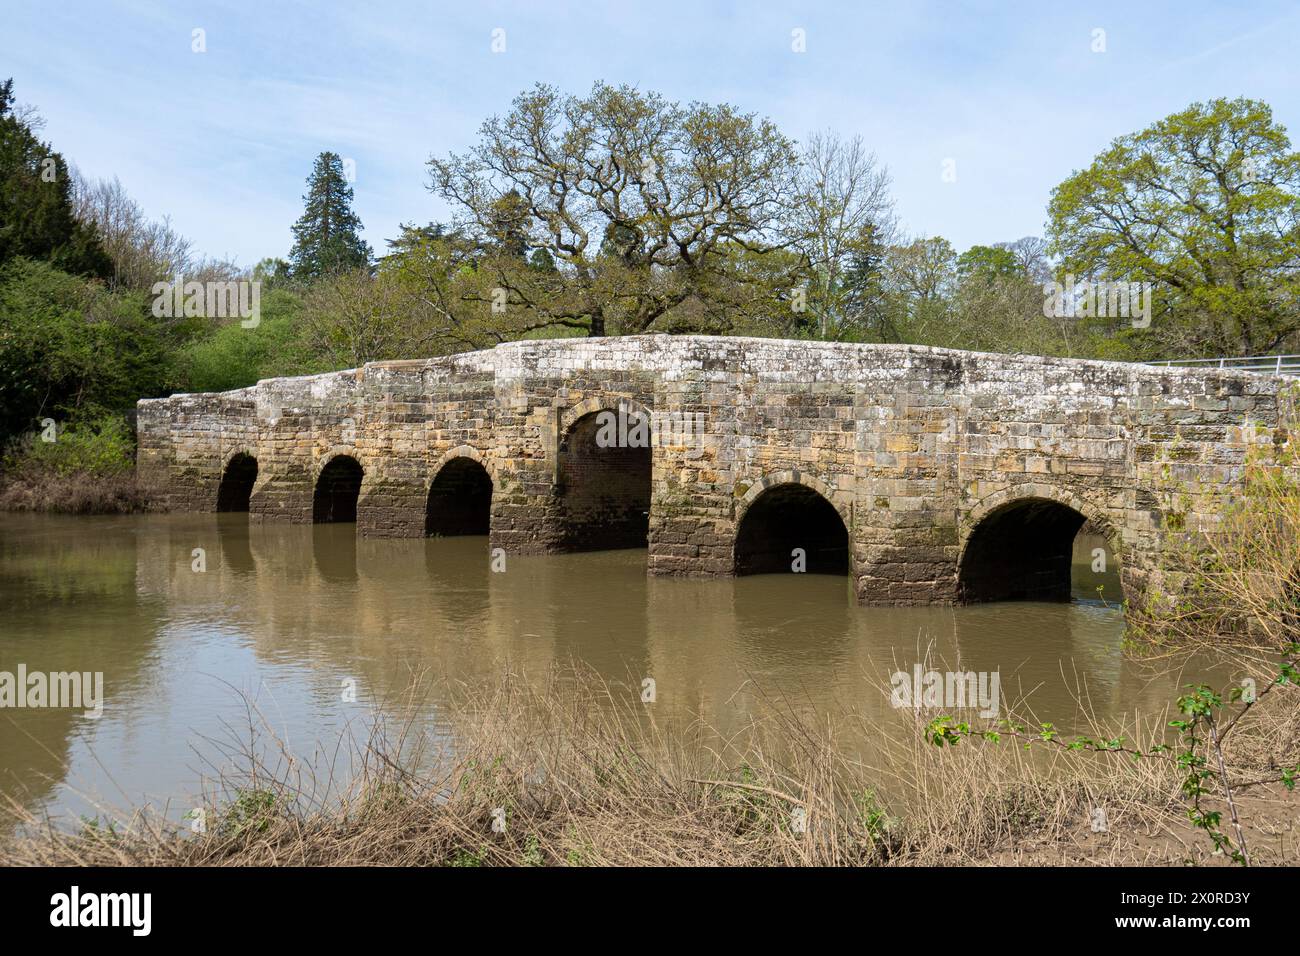 Stopham Bridge, West Sussex, England, UK, across the River Arun, a pretty medieval seven arched stone bridge that is a grade I listed building Stock Photo